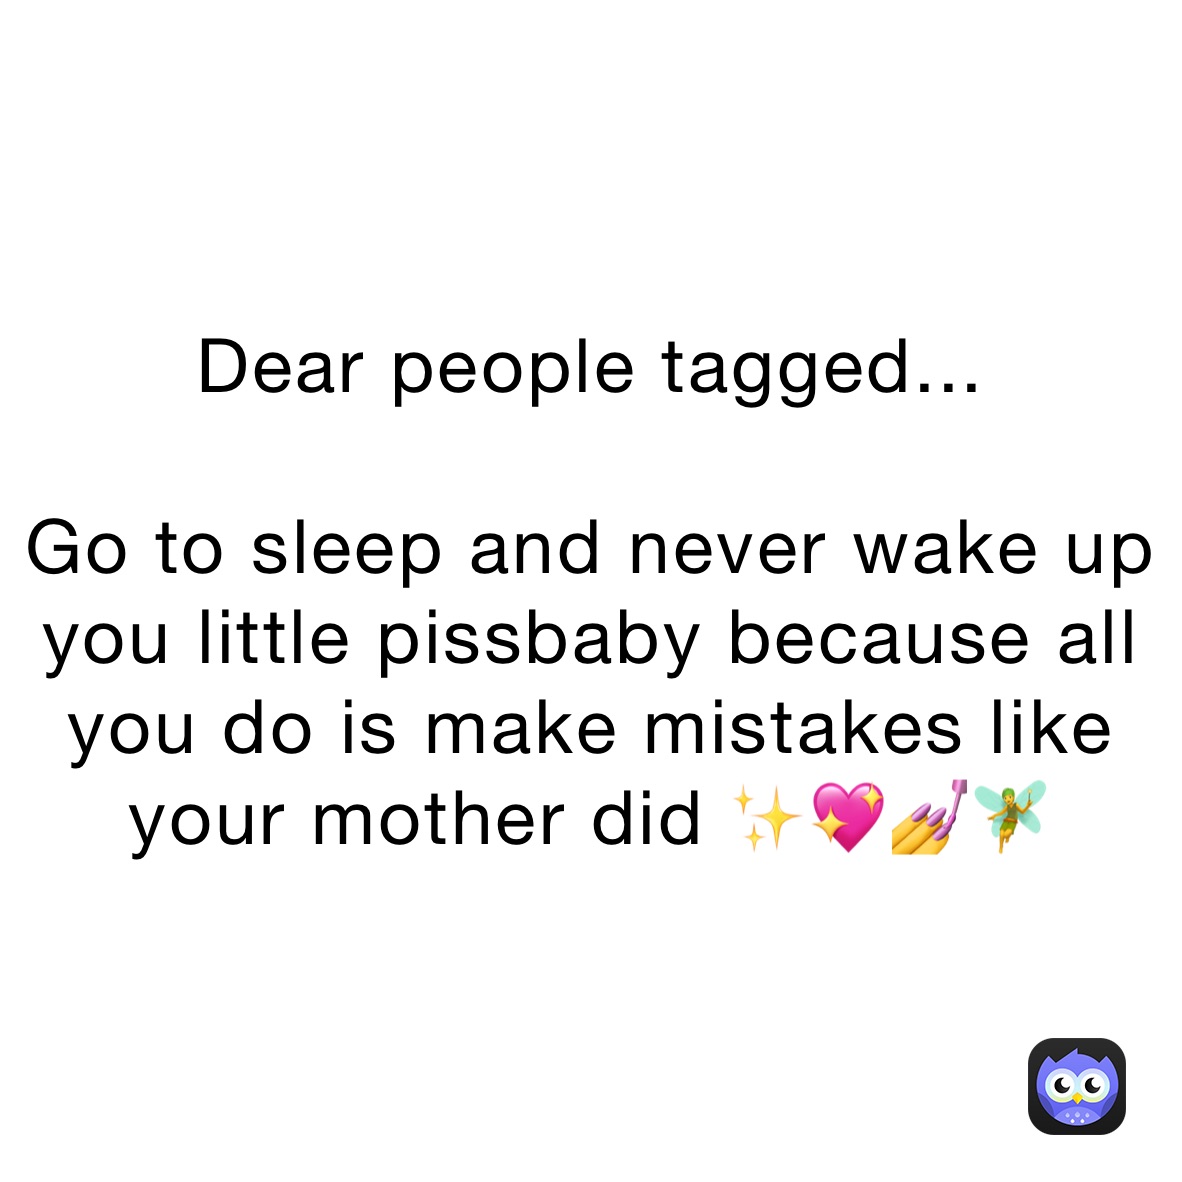 Dear people tagged...

Go to sleep and never wake up you little pissbaby because all you do is make mistakes like your mother did ✨💖💅🧚